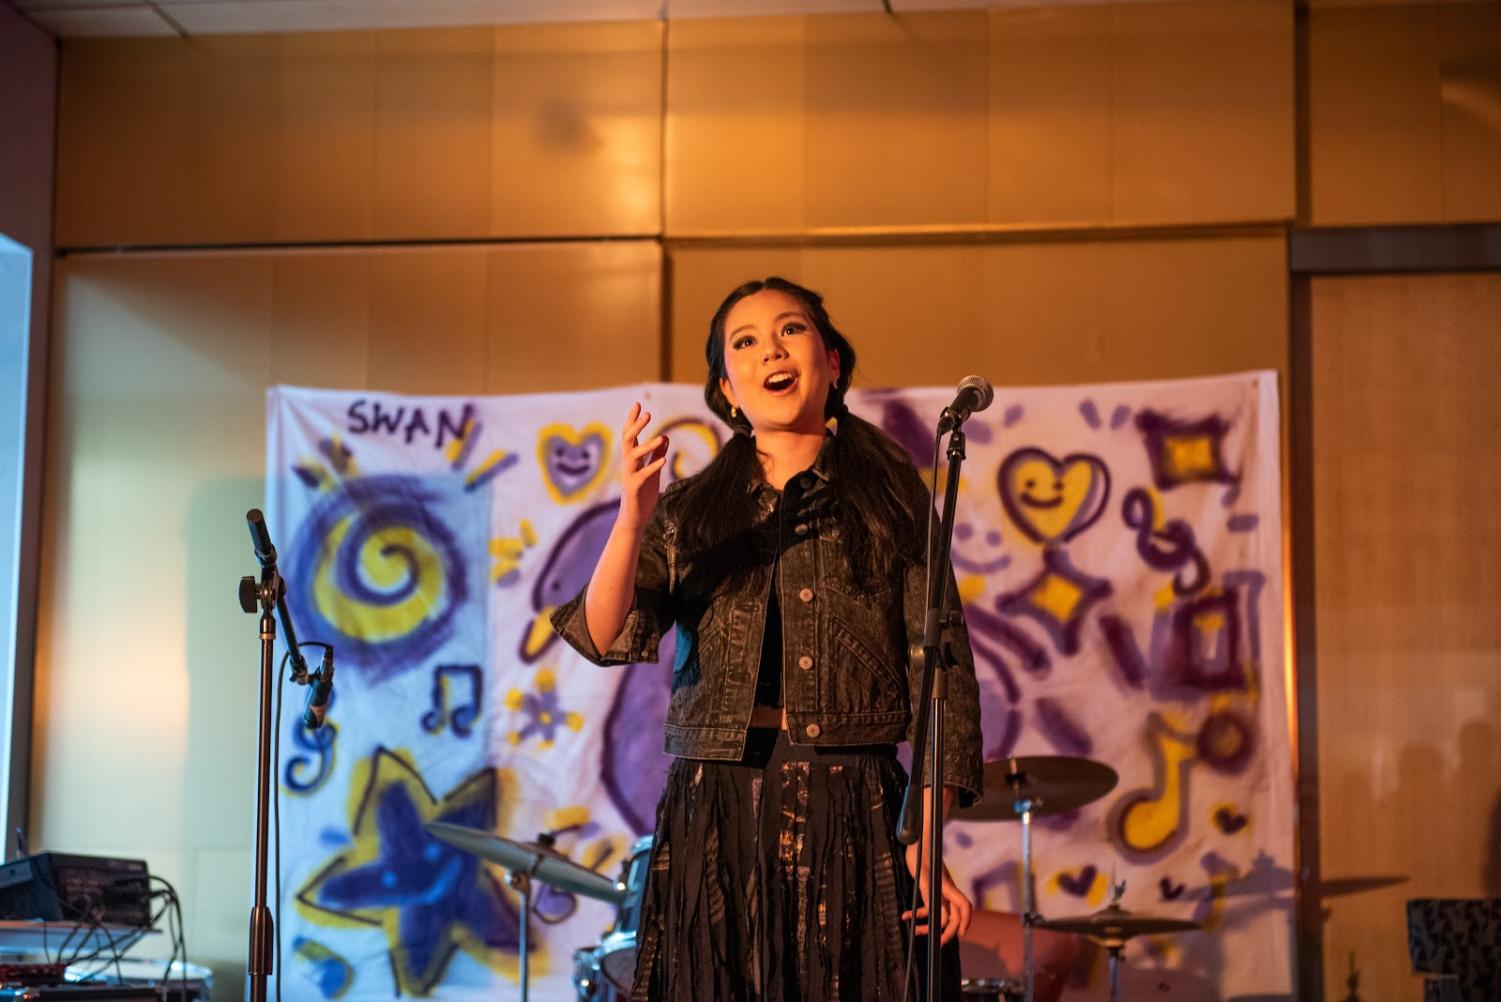 A singer with dark pigtails wearing a black denim jacket and a black batik skirt belts in front of a microphone.